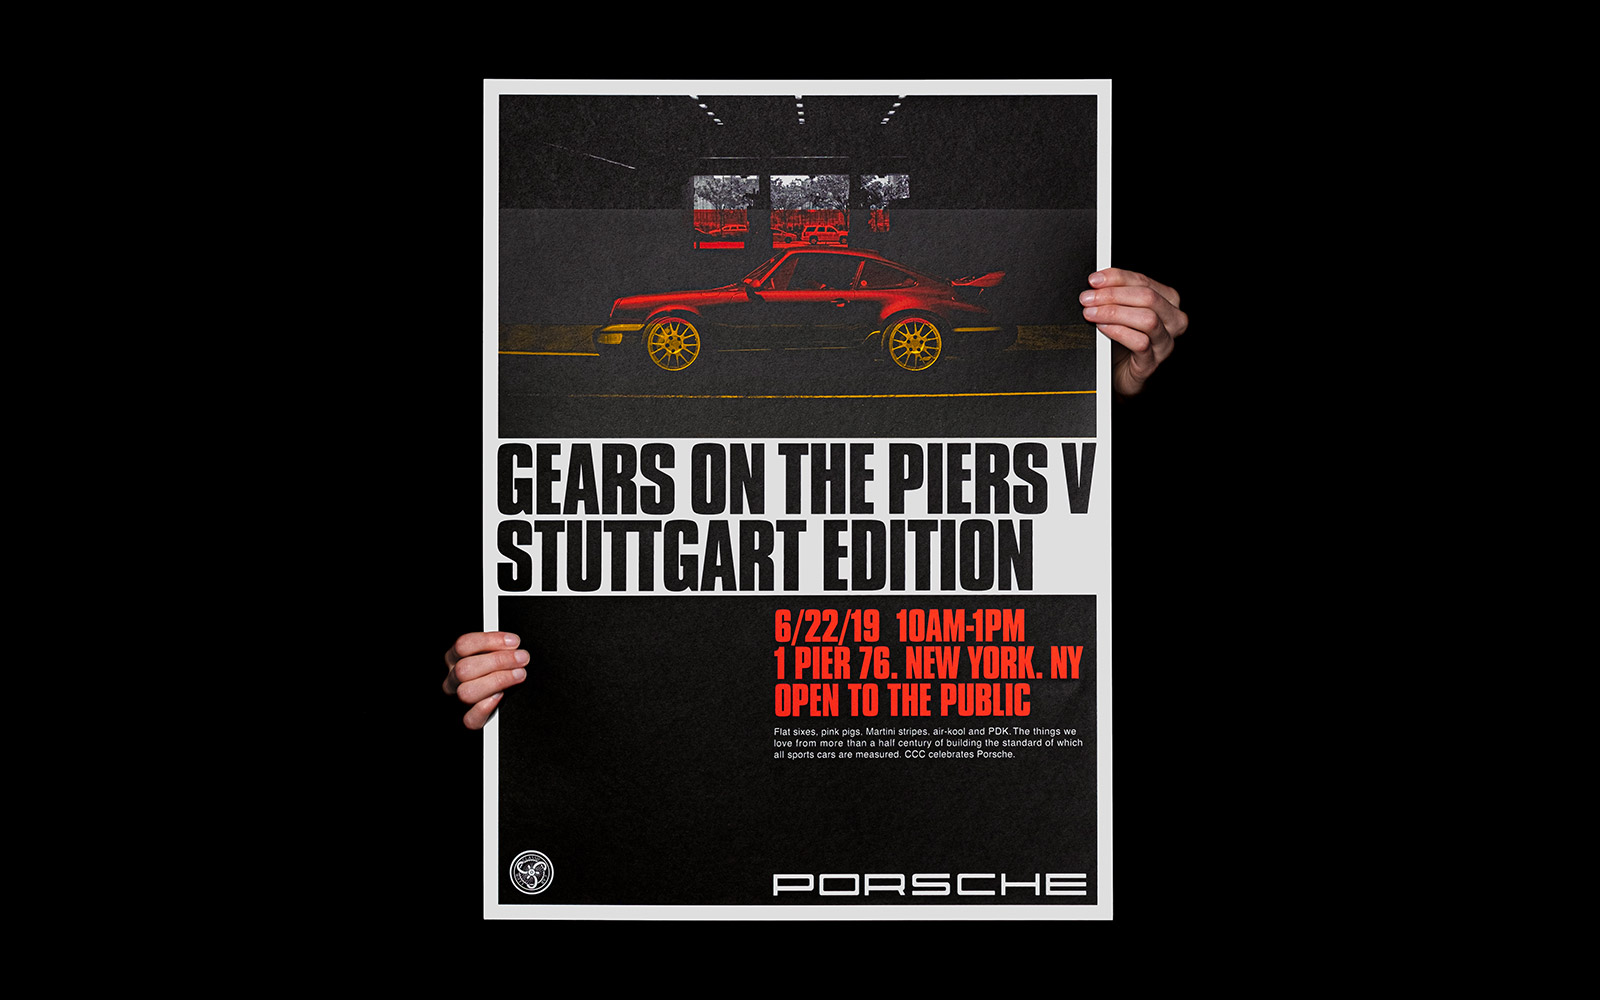 A photograph of the silk screened poster for Gears on the Pier 5: Stuttgart edition